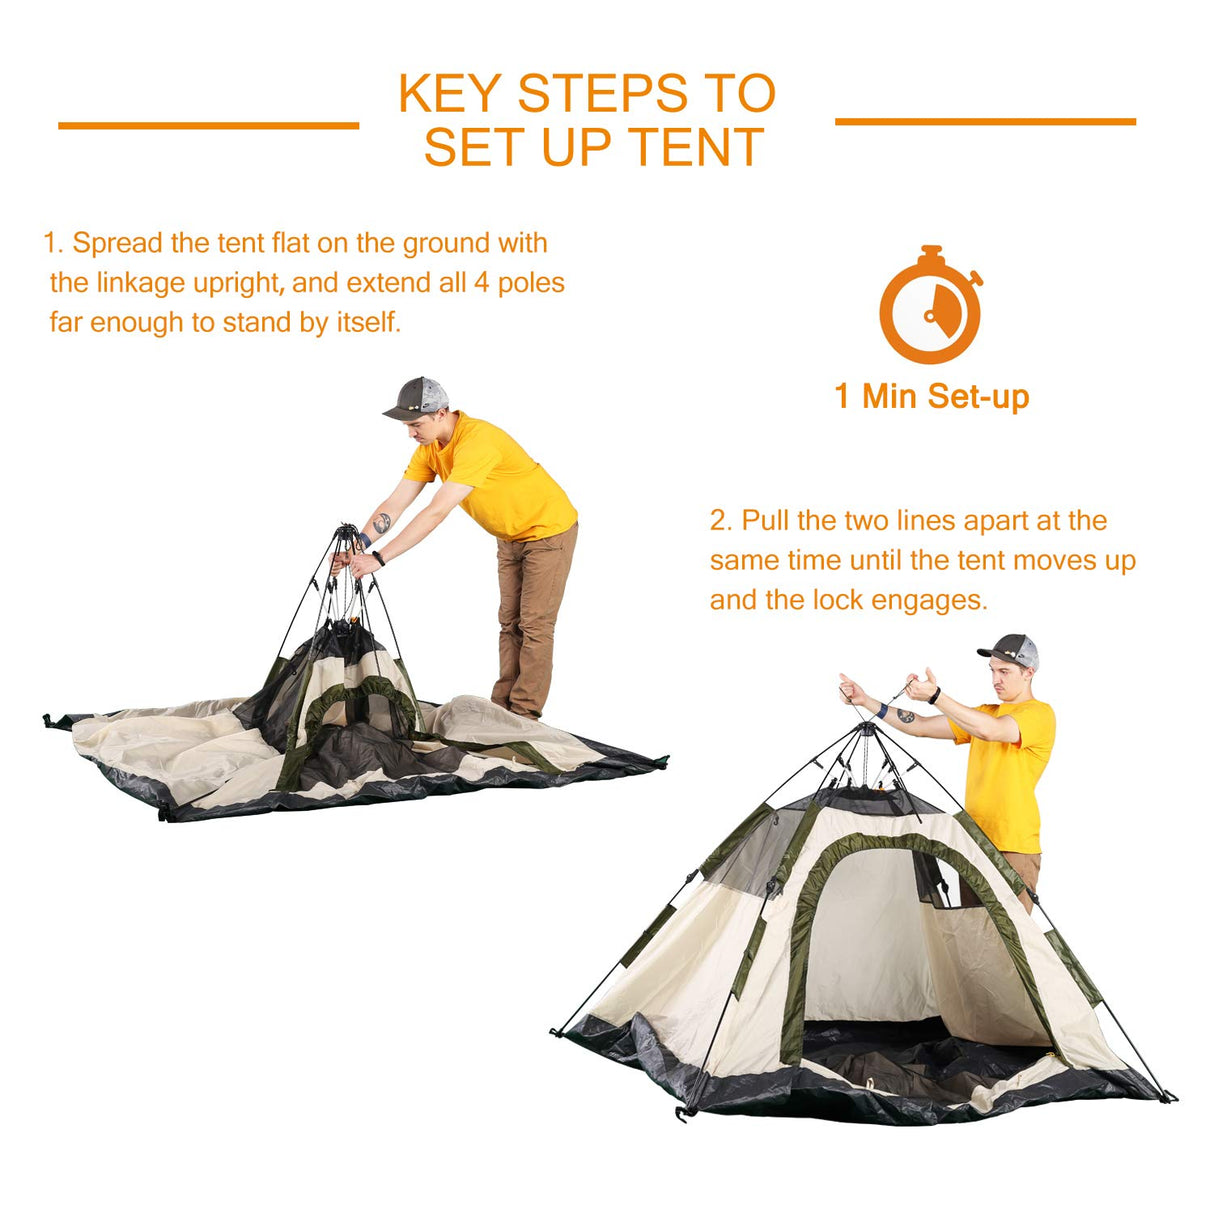 QUICK-UP 2-3 Person Tents for Camping Backpacking, Instant Pop Up Hiking Tent 2-3 Person Easy Set Up, Double Layer Outdoor Water-Resistant Lightweight with Rainfly Top Mesh and Carry Bag - 7' x 6.3'